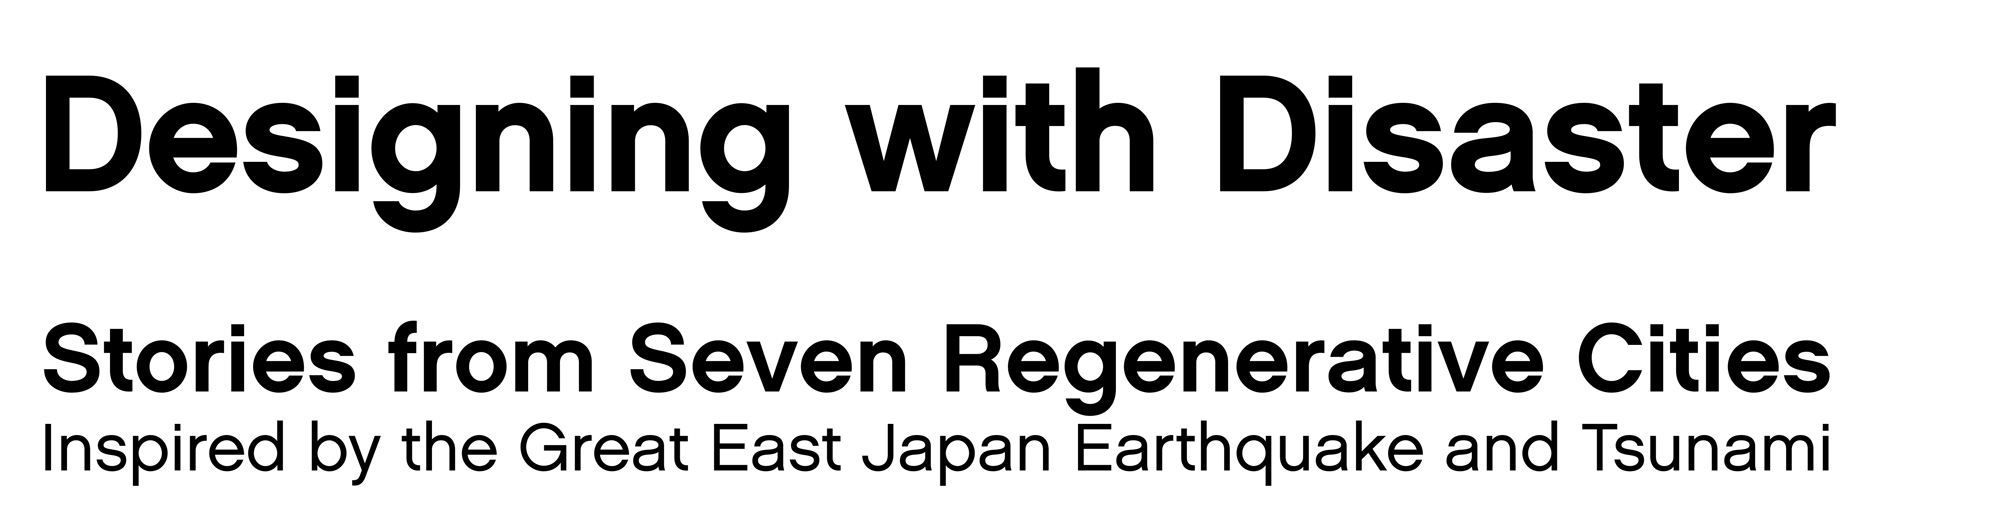 Designing with Disaster | Stories from Seven Regenerative Cities | Inspired by the Great East Japan Earthquake and Tsunami